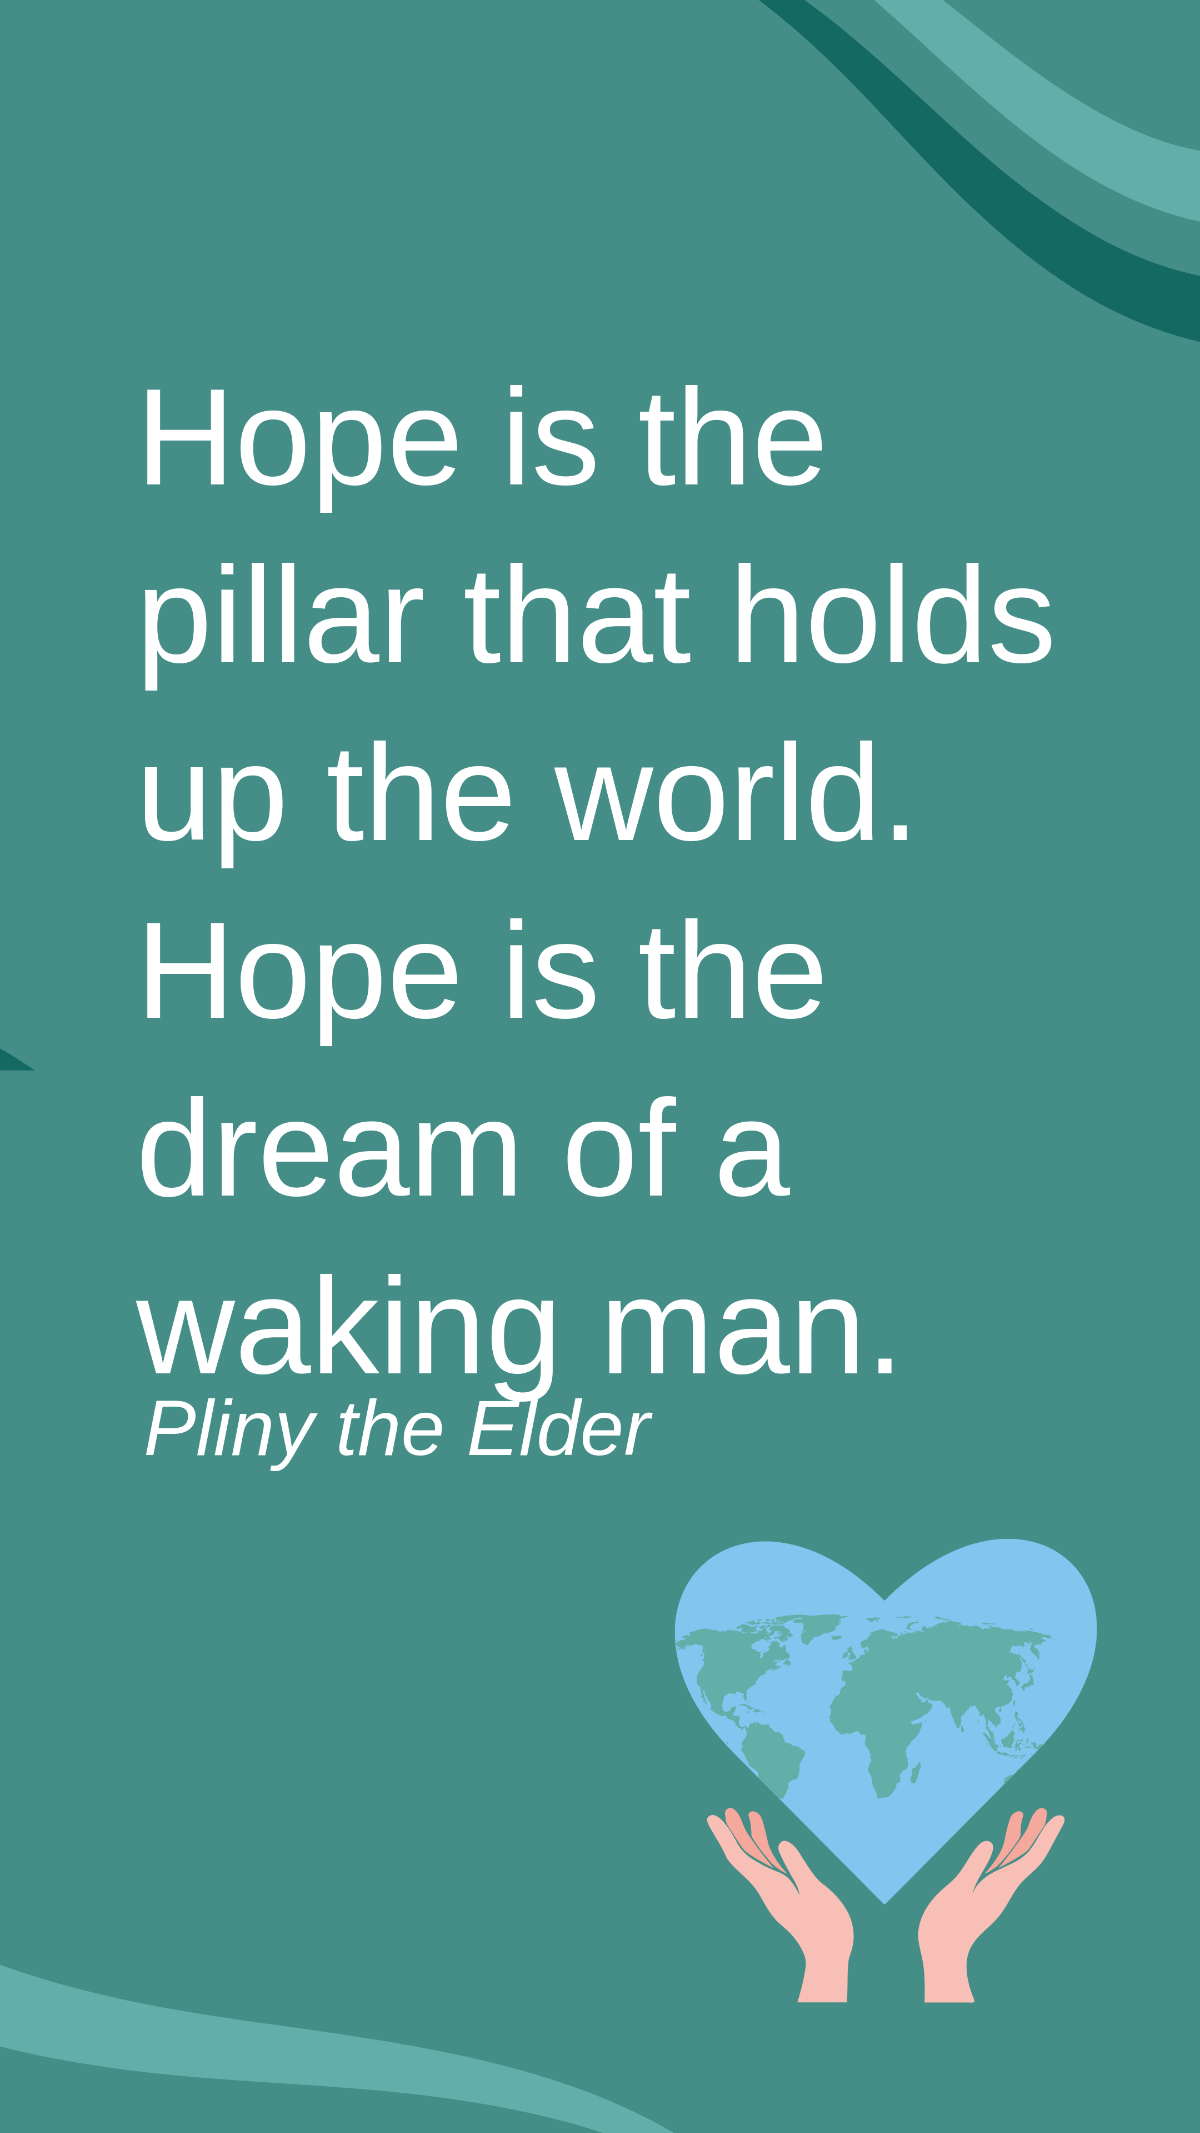 Pliny the Elder - Hope is the pillar that holds up the world. Hope is the dream of a waking man.